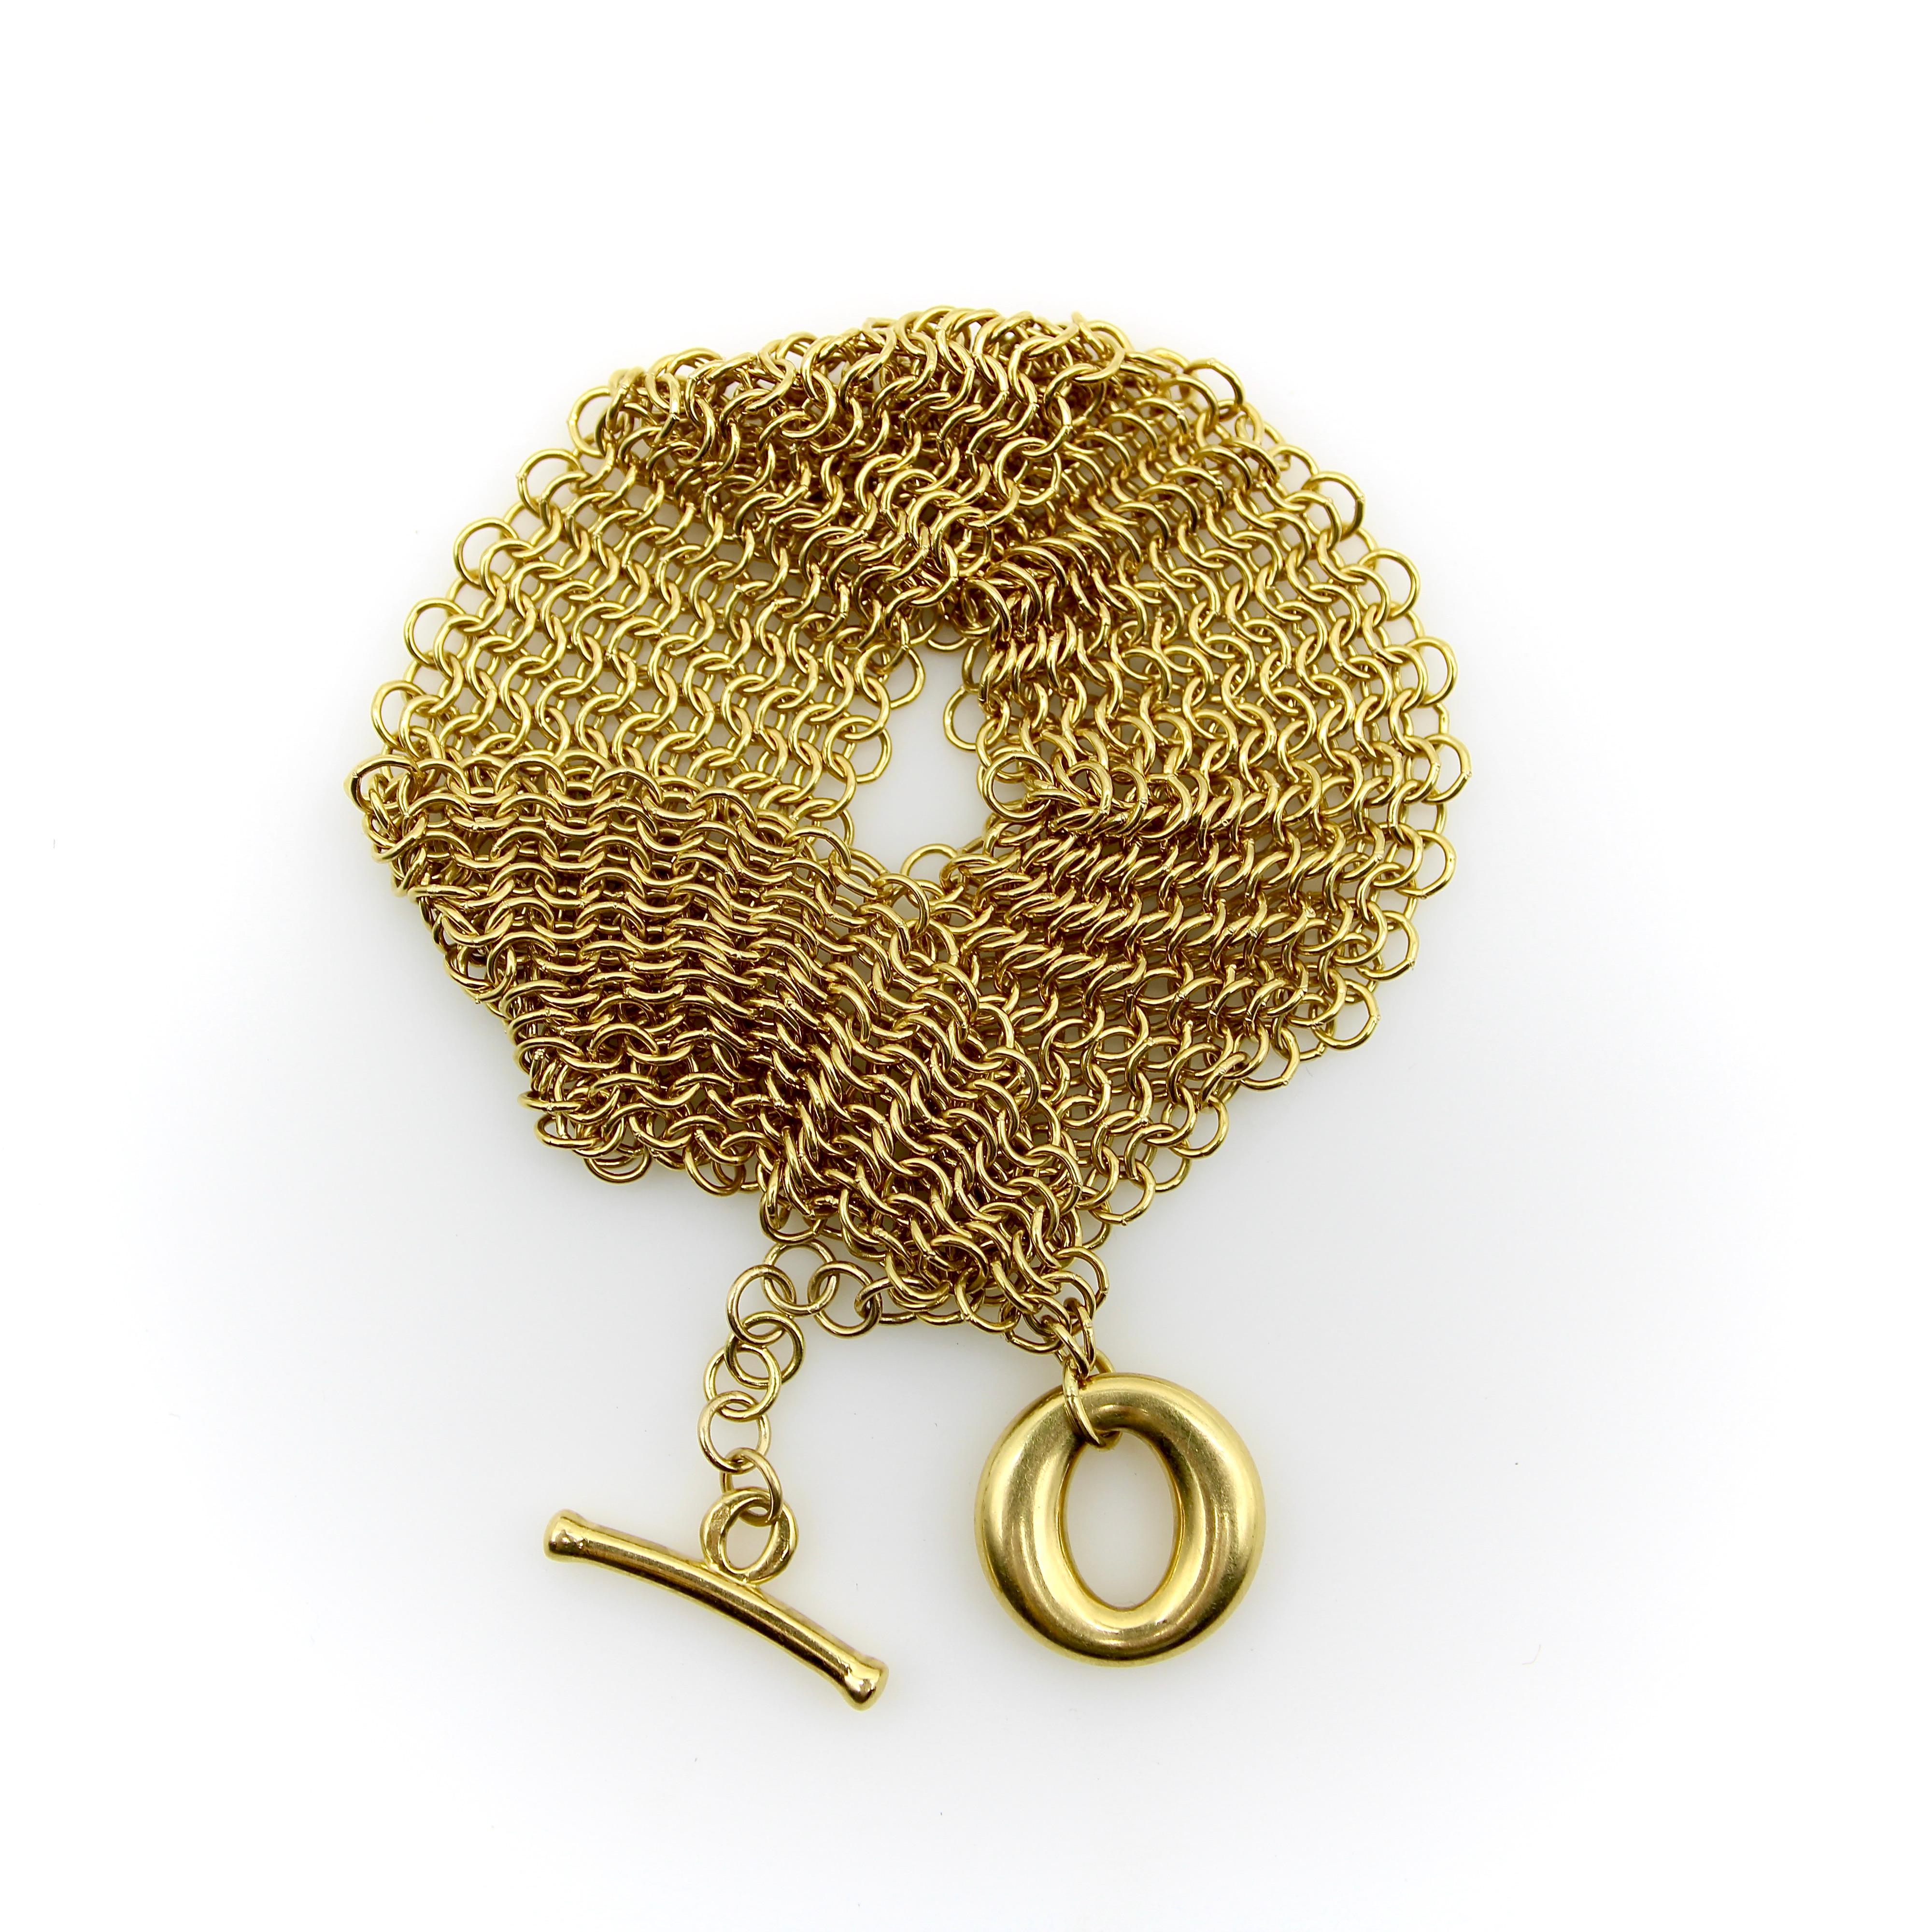 Designed by Elsa Peretti for Tiffany & Co., this 18k gold Somerset bracelet is a gorgeous, fluid piece that drapes elegantly around the wrist. Layers of circular gold links are interwoven to create golden mesh that is reminiscent of medieval